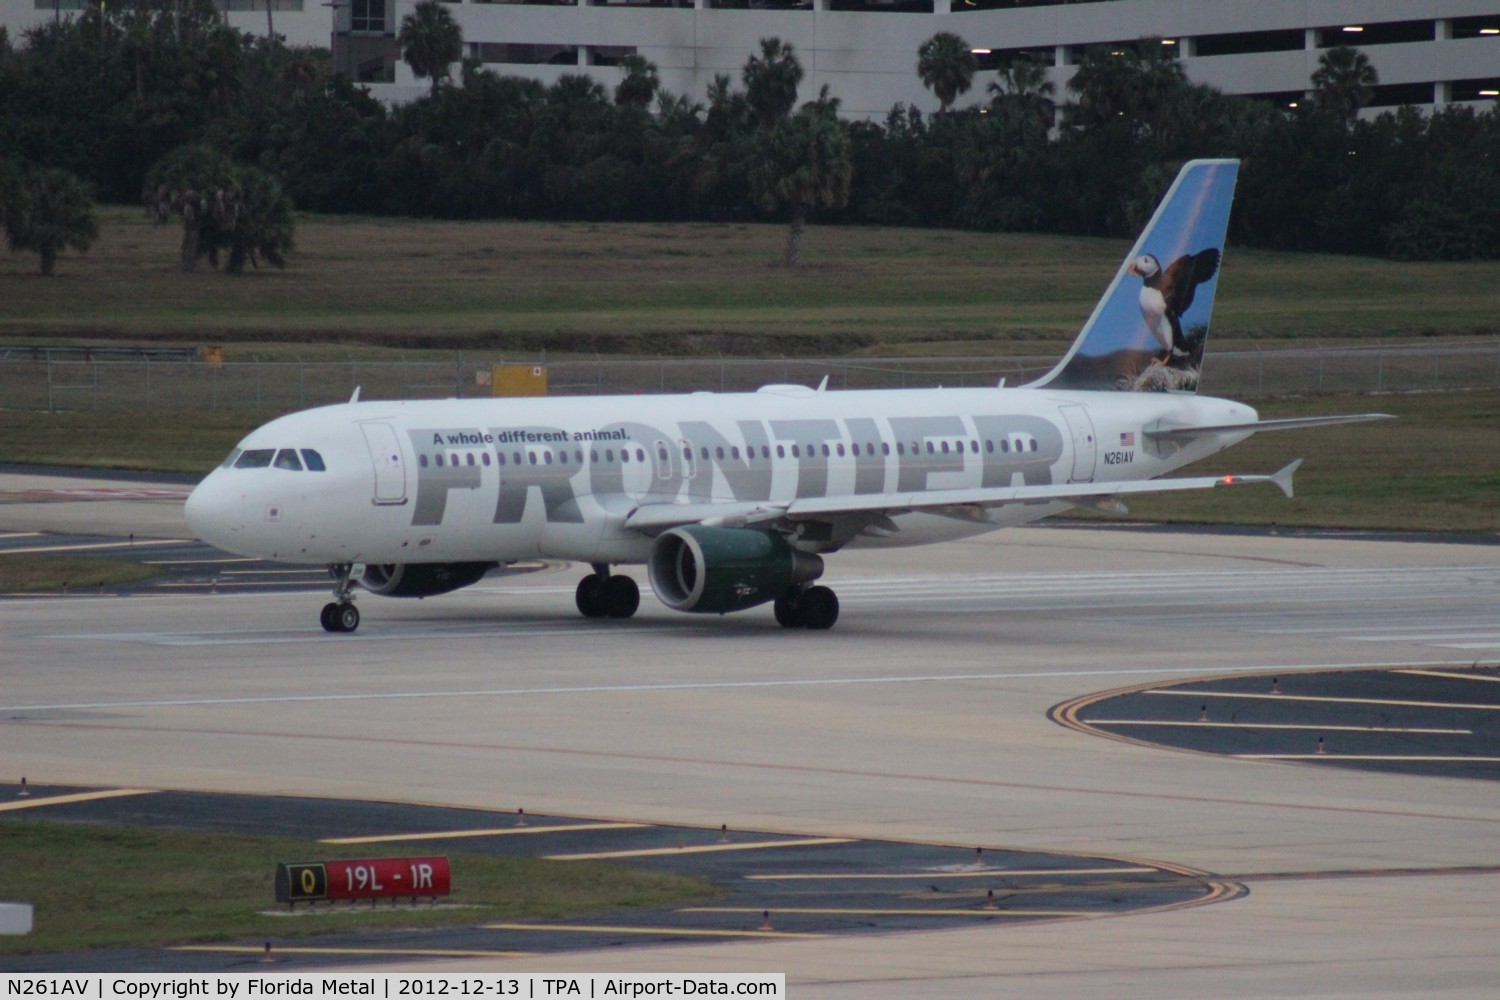 N261AV, 2001 Airbus A320-214 C/N 1615, Frontier puffin A320 (as of 2013 wears tail number N218FR)